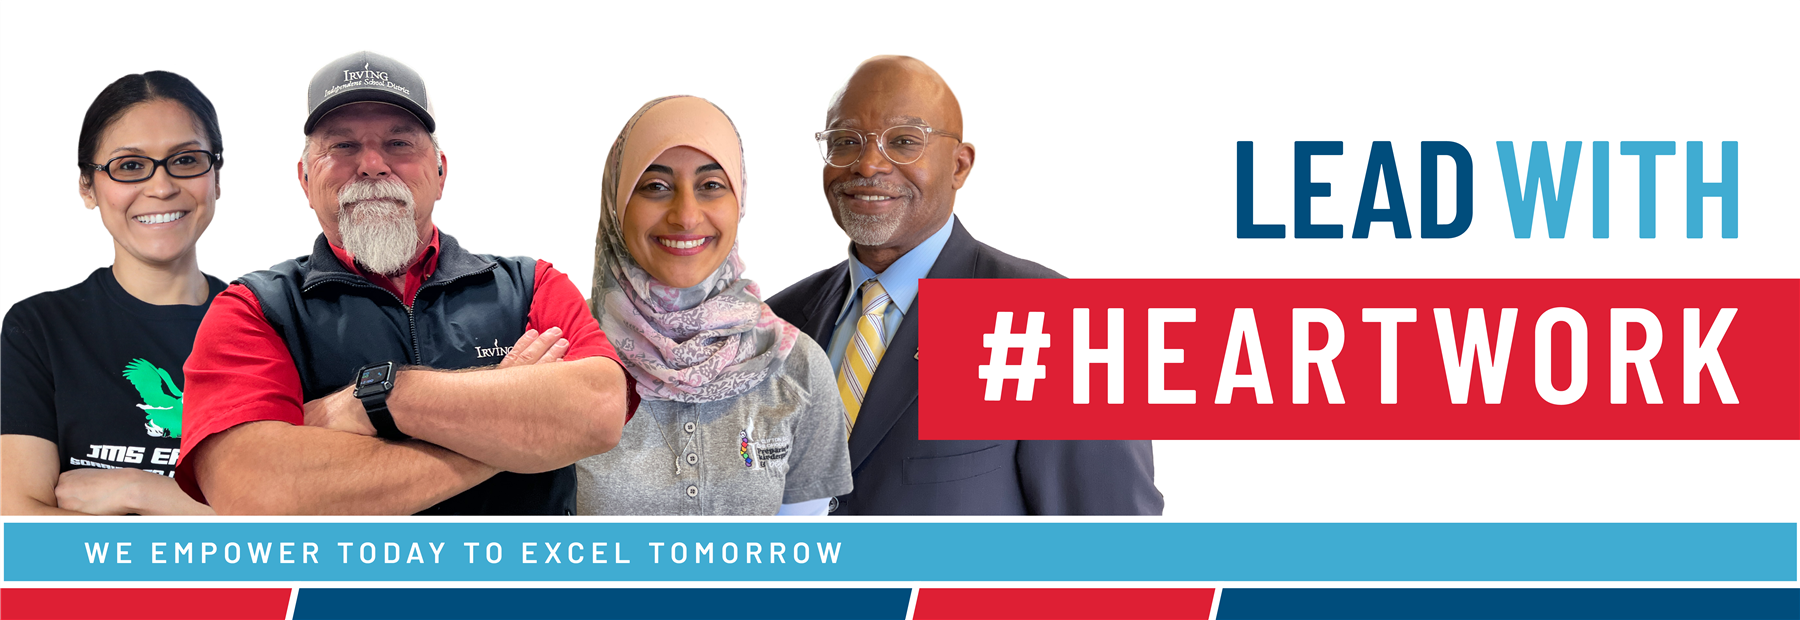 Lead with #Heartwork - We Empower Today to Excel Tomorrow